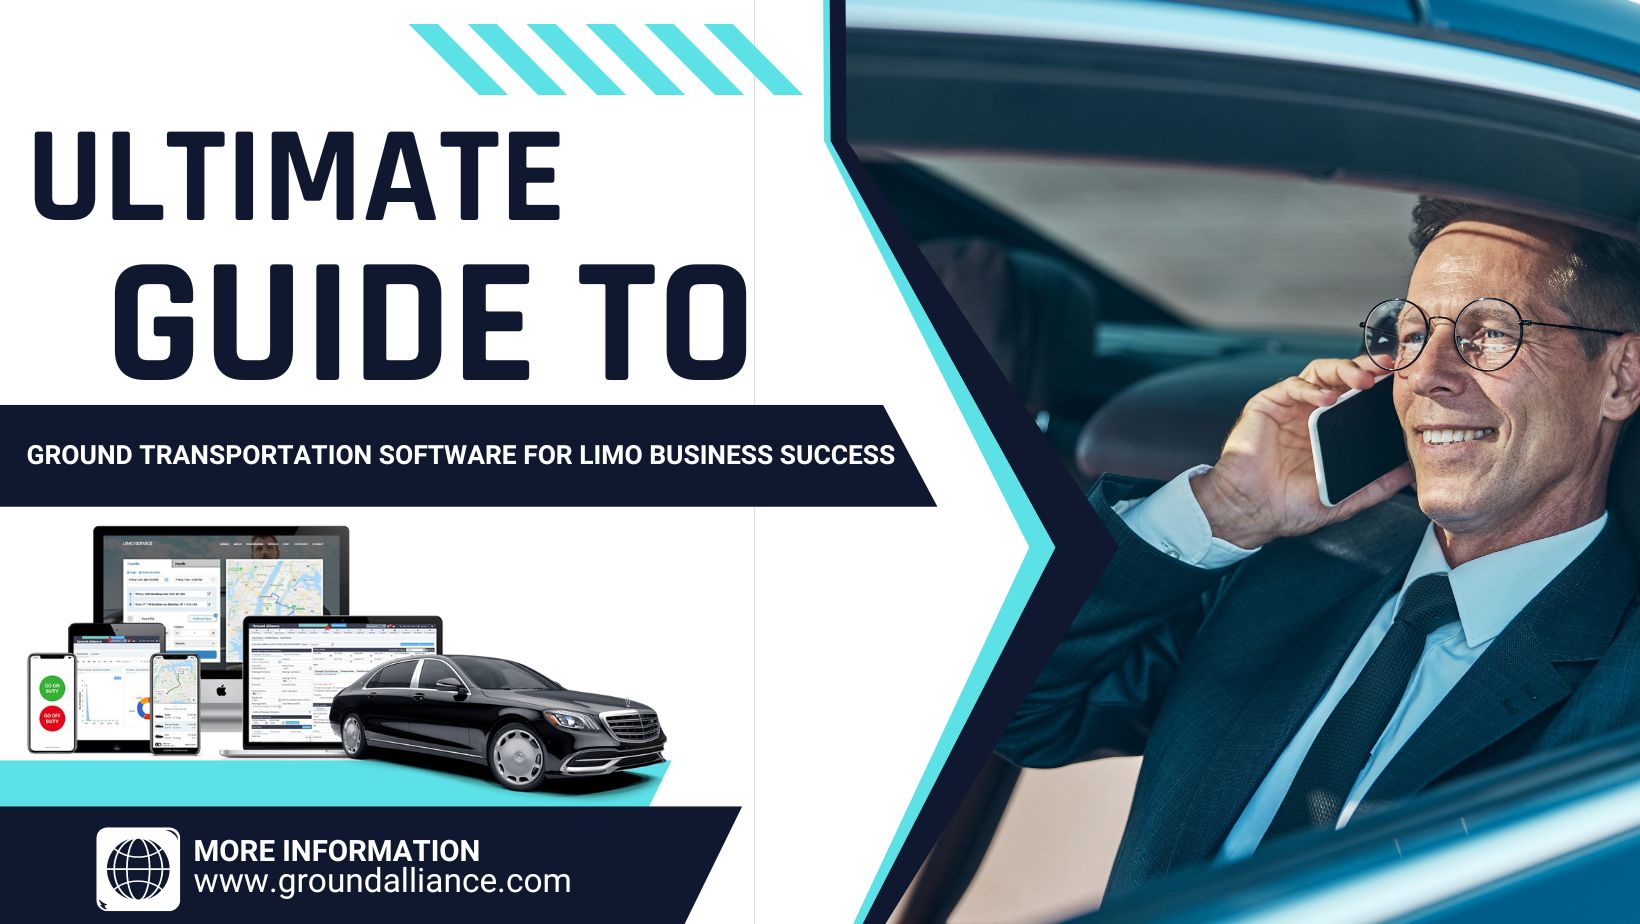 Ground Transportation Software for Limo Business Success